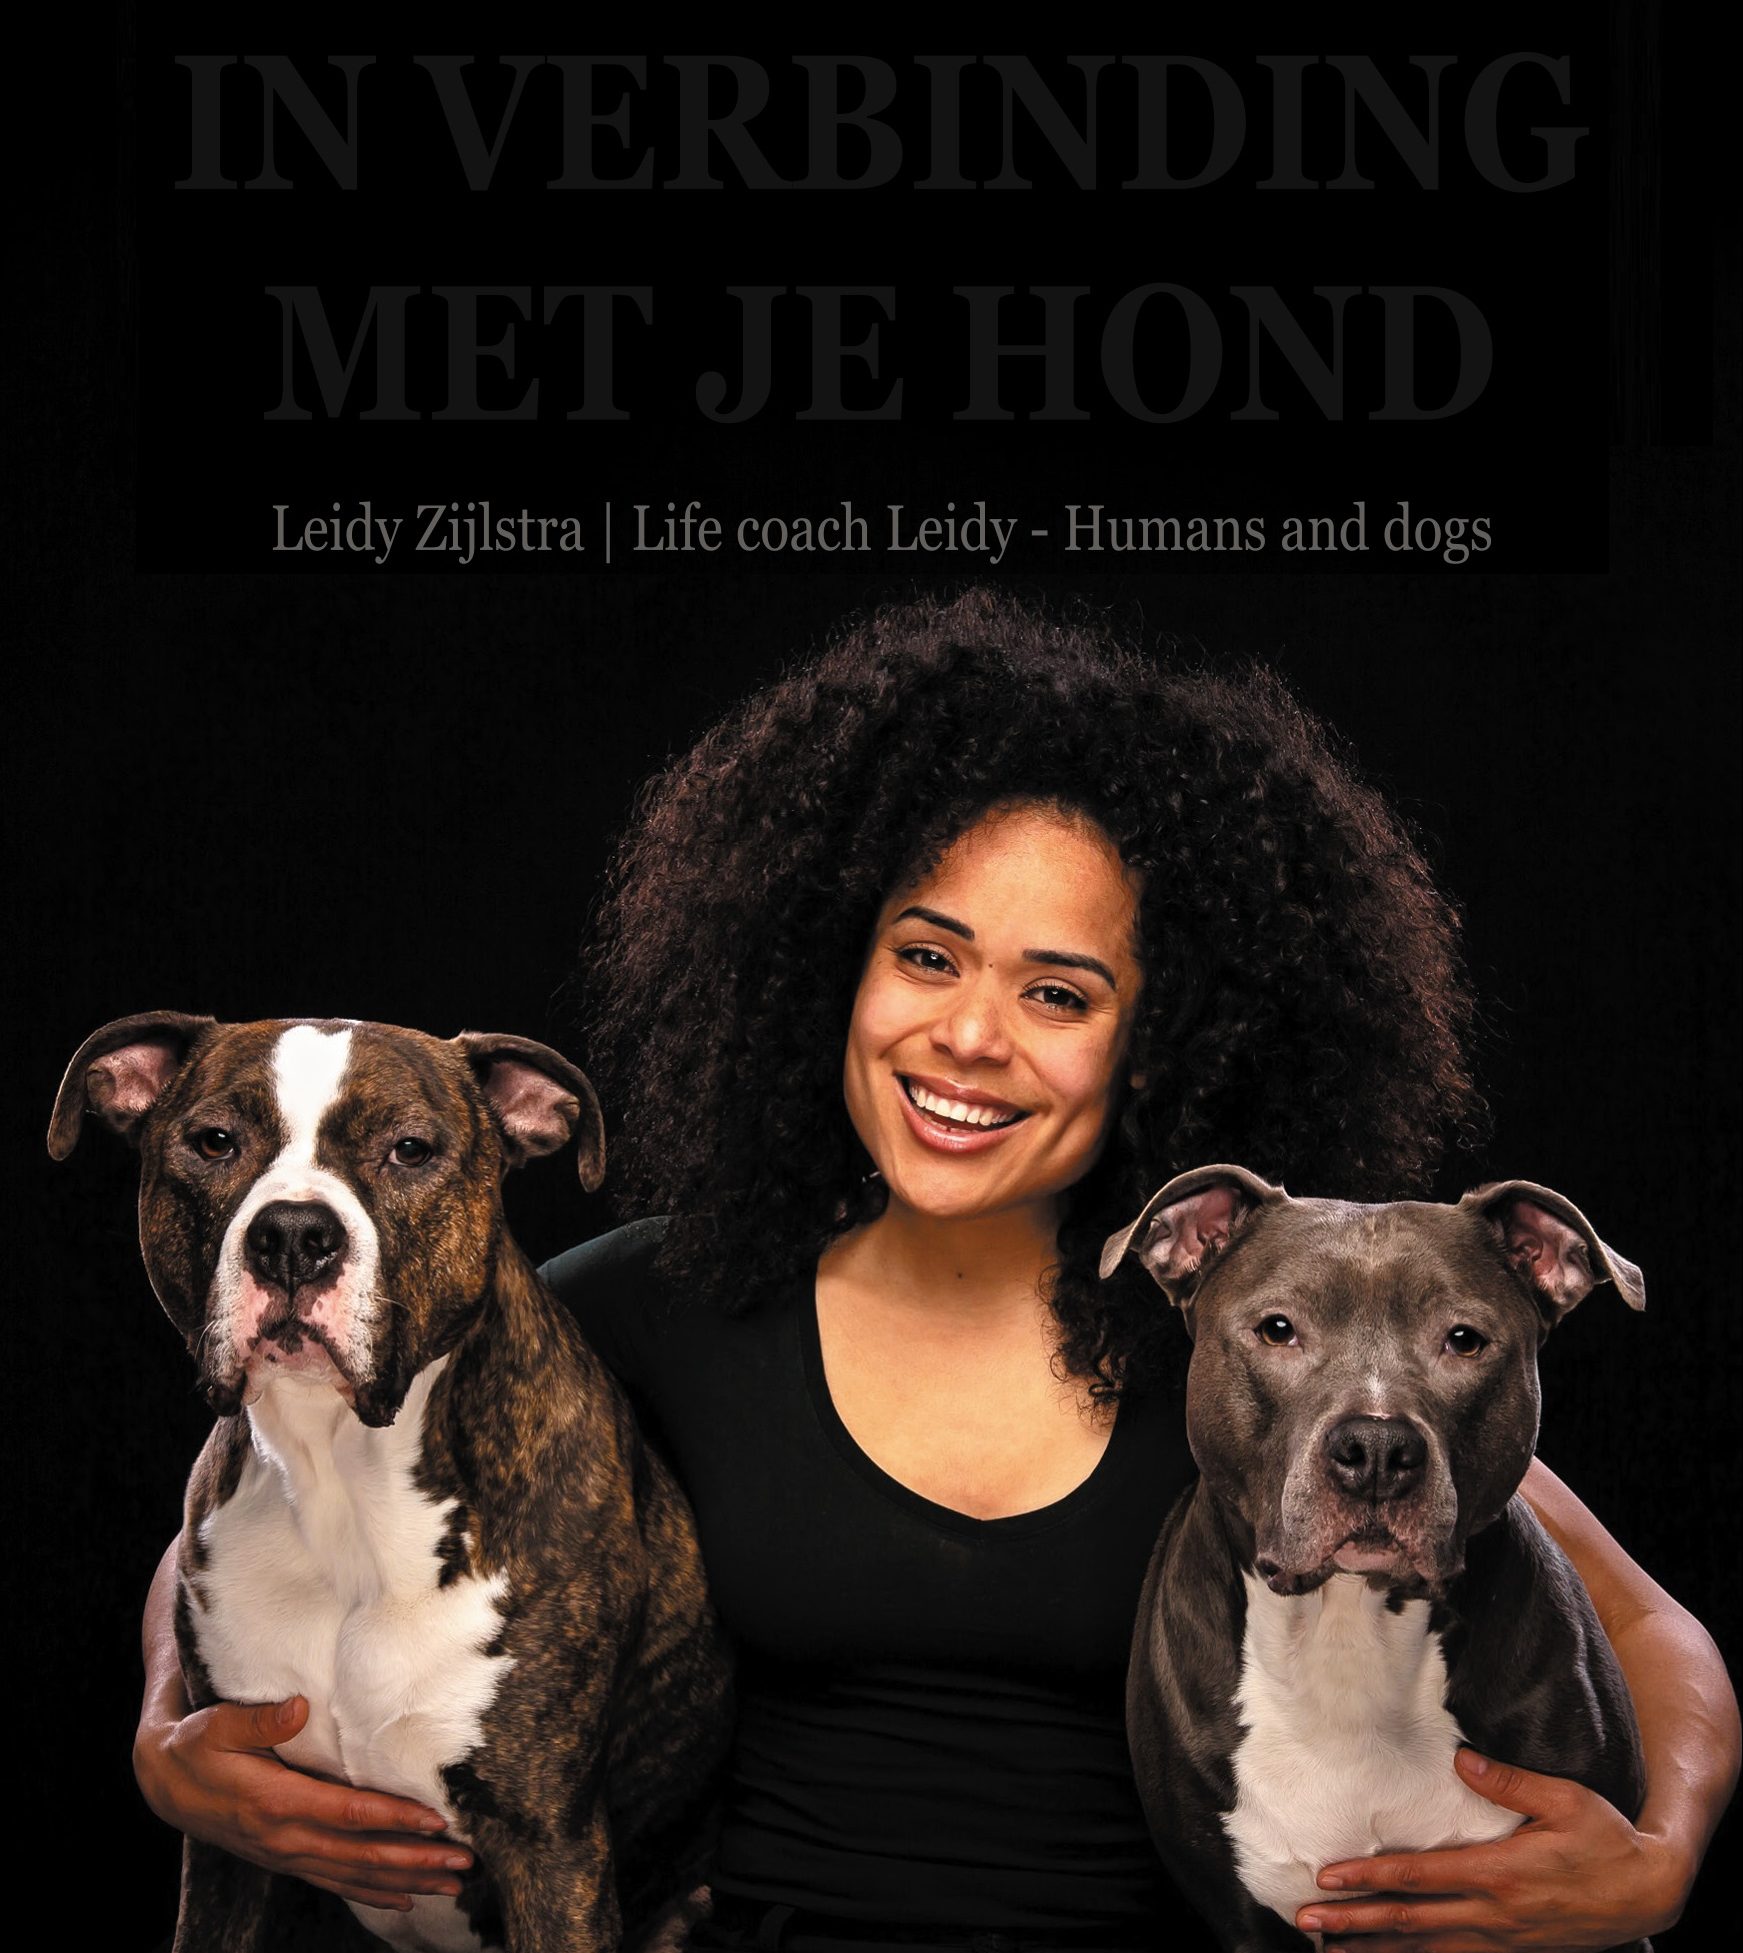 Life coach leidy - Humans and dogs